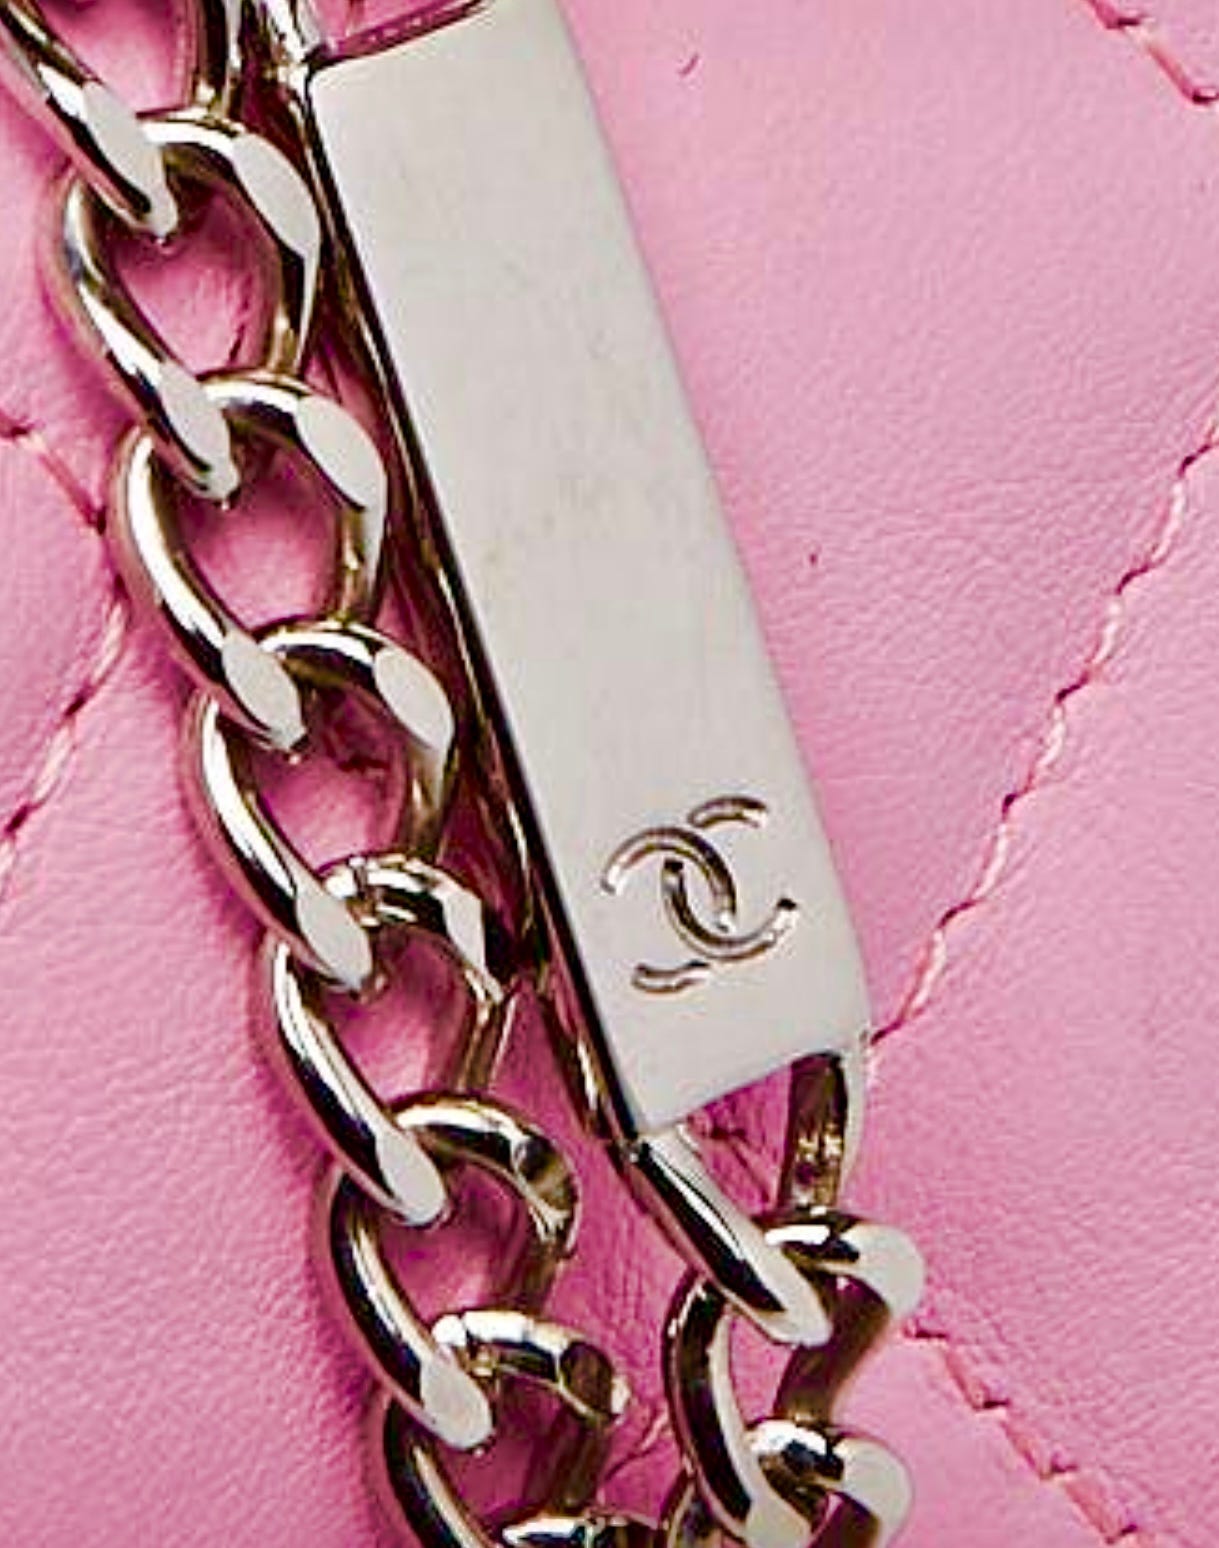 Chanel CC logo engraving on the zipper pulls with the CC interlocking logo  should always have the right C overlapping the left C on top, and the left  C overlapping at the